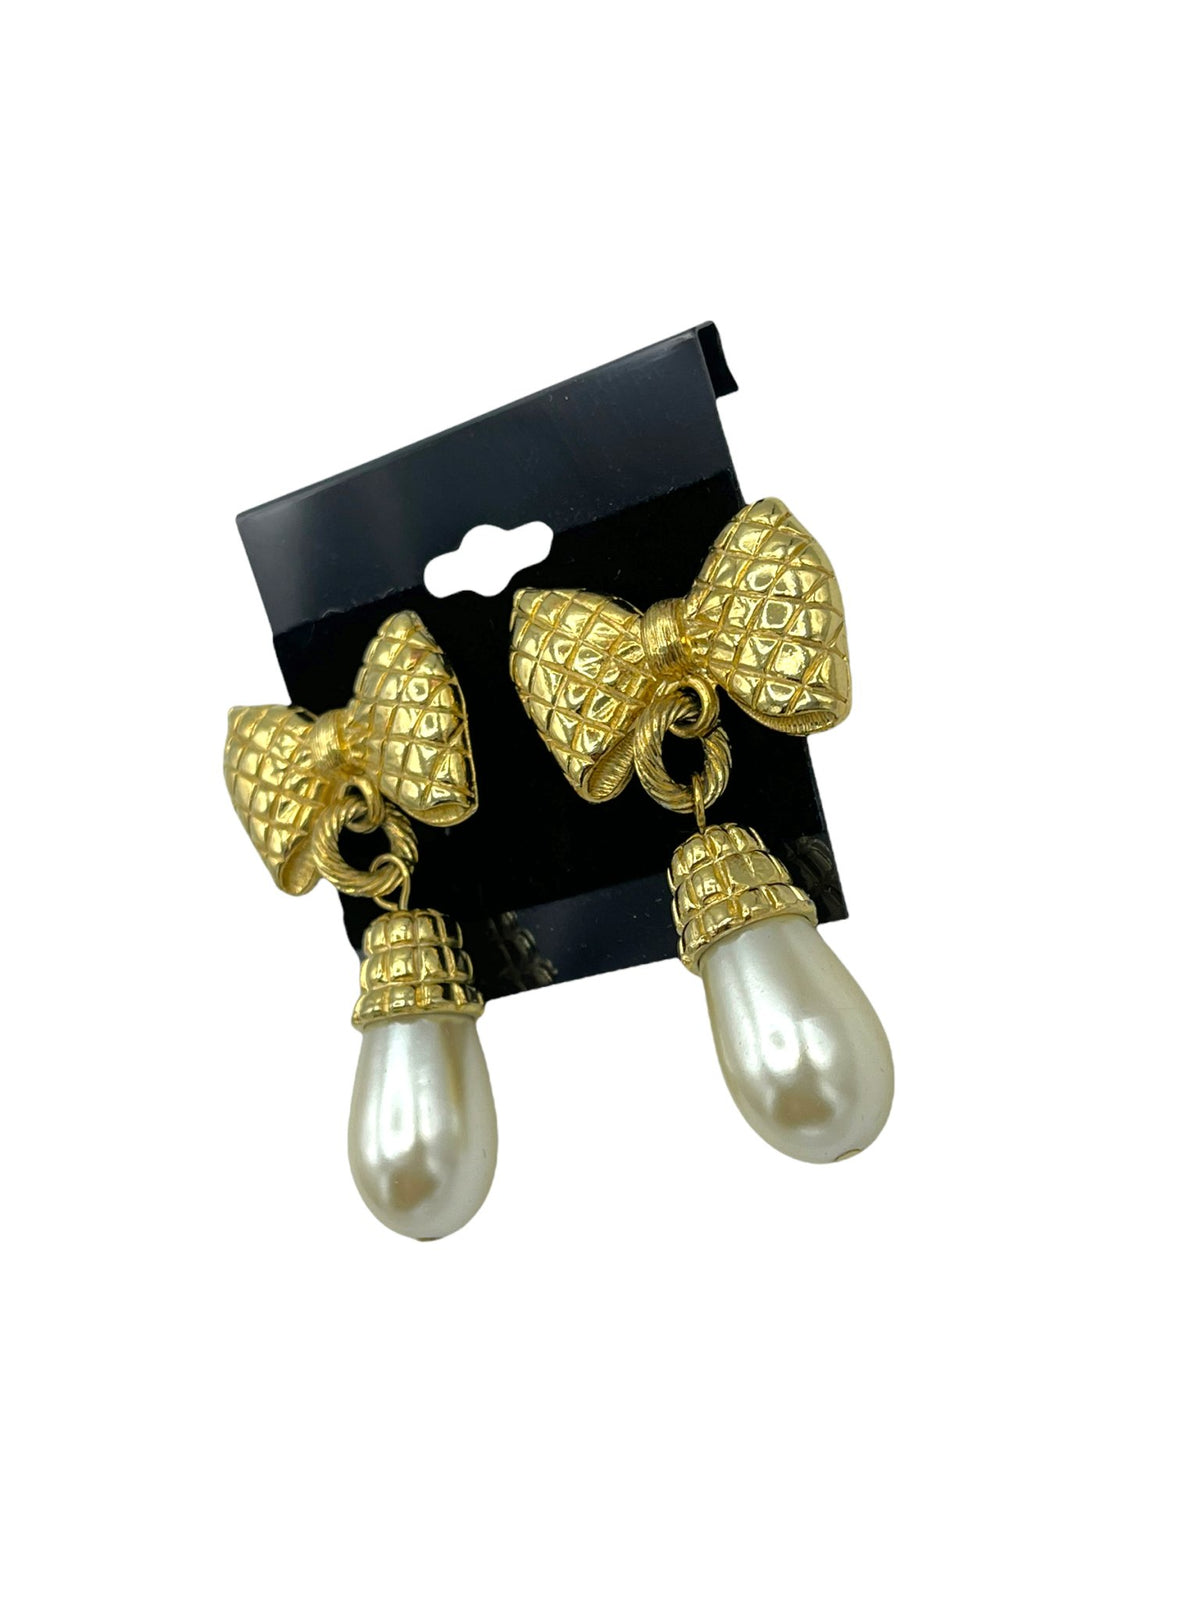 Gold Bow Pearl Drop Vintage Pierced Earrings - 24 Wishes Vintage Jewelry